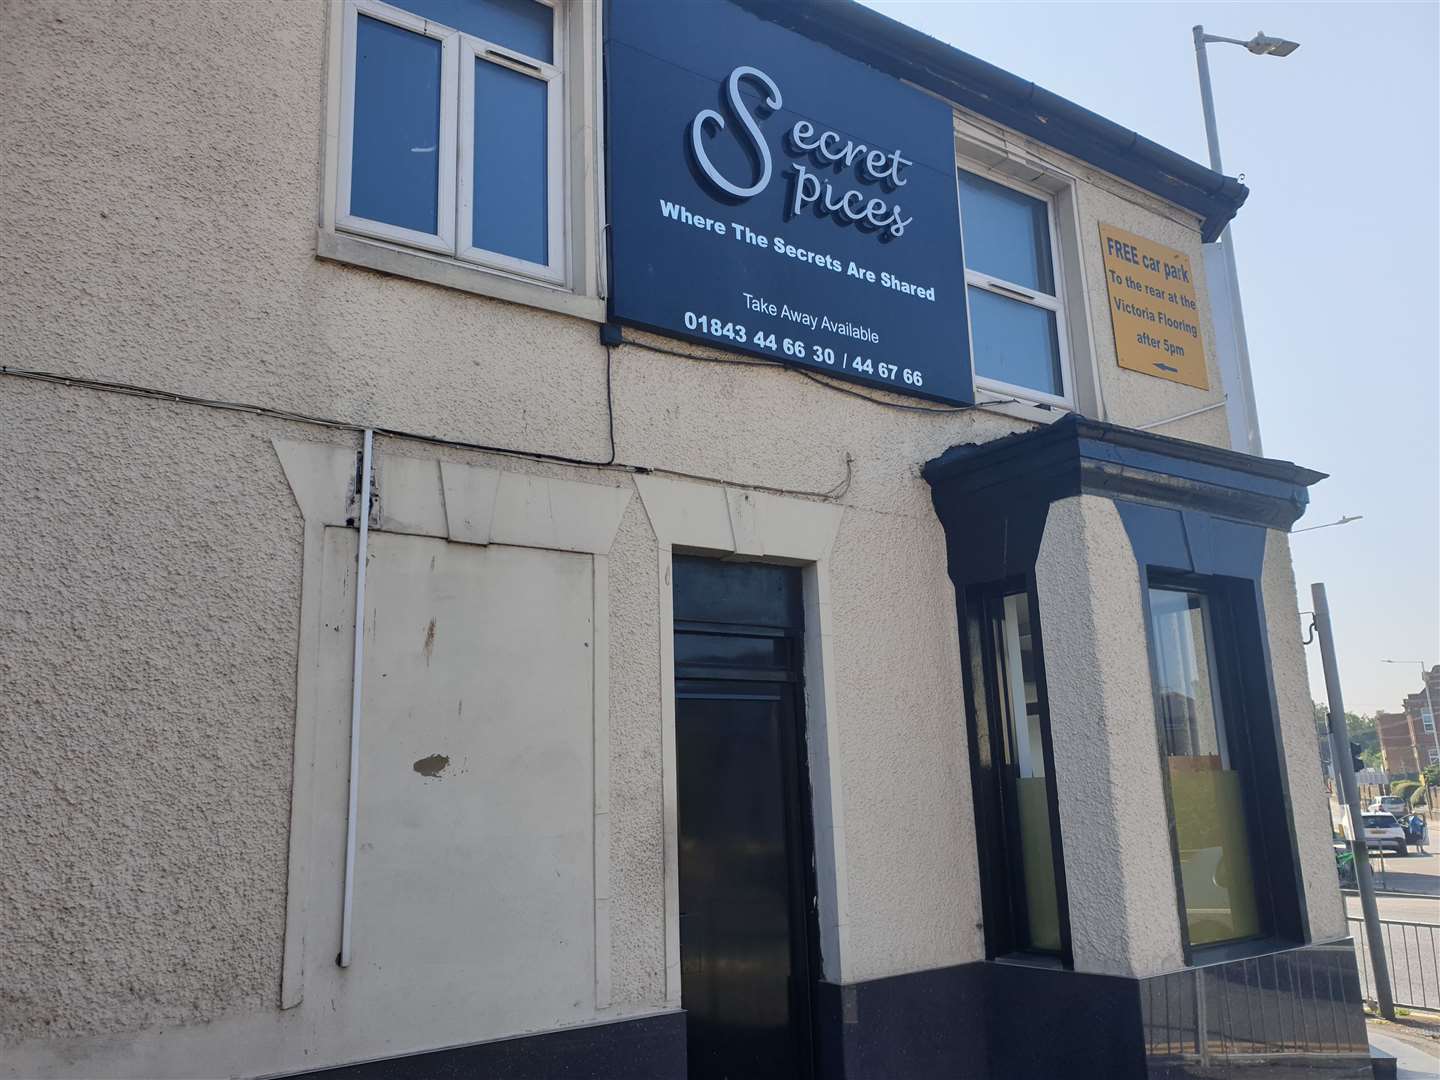 Secret Spices in Margate is the top-rated curry house on TripAdvisor